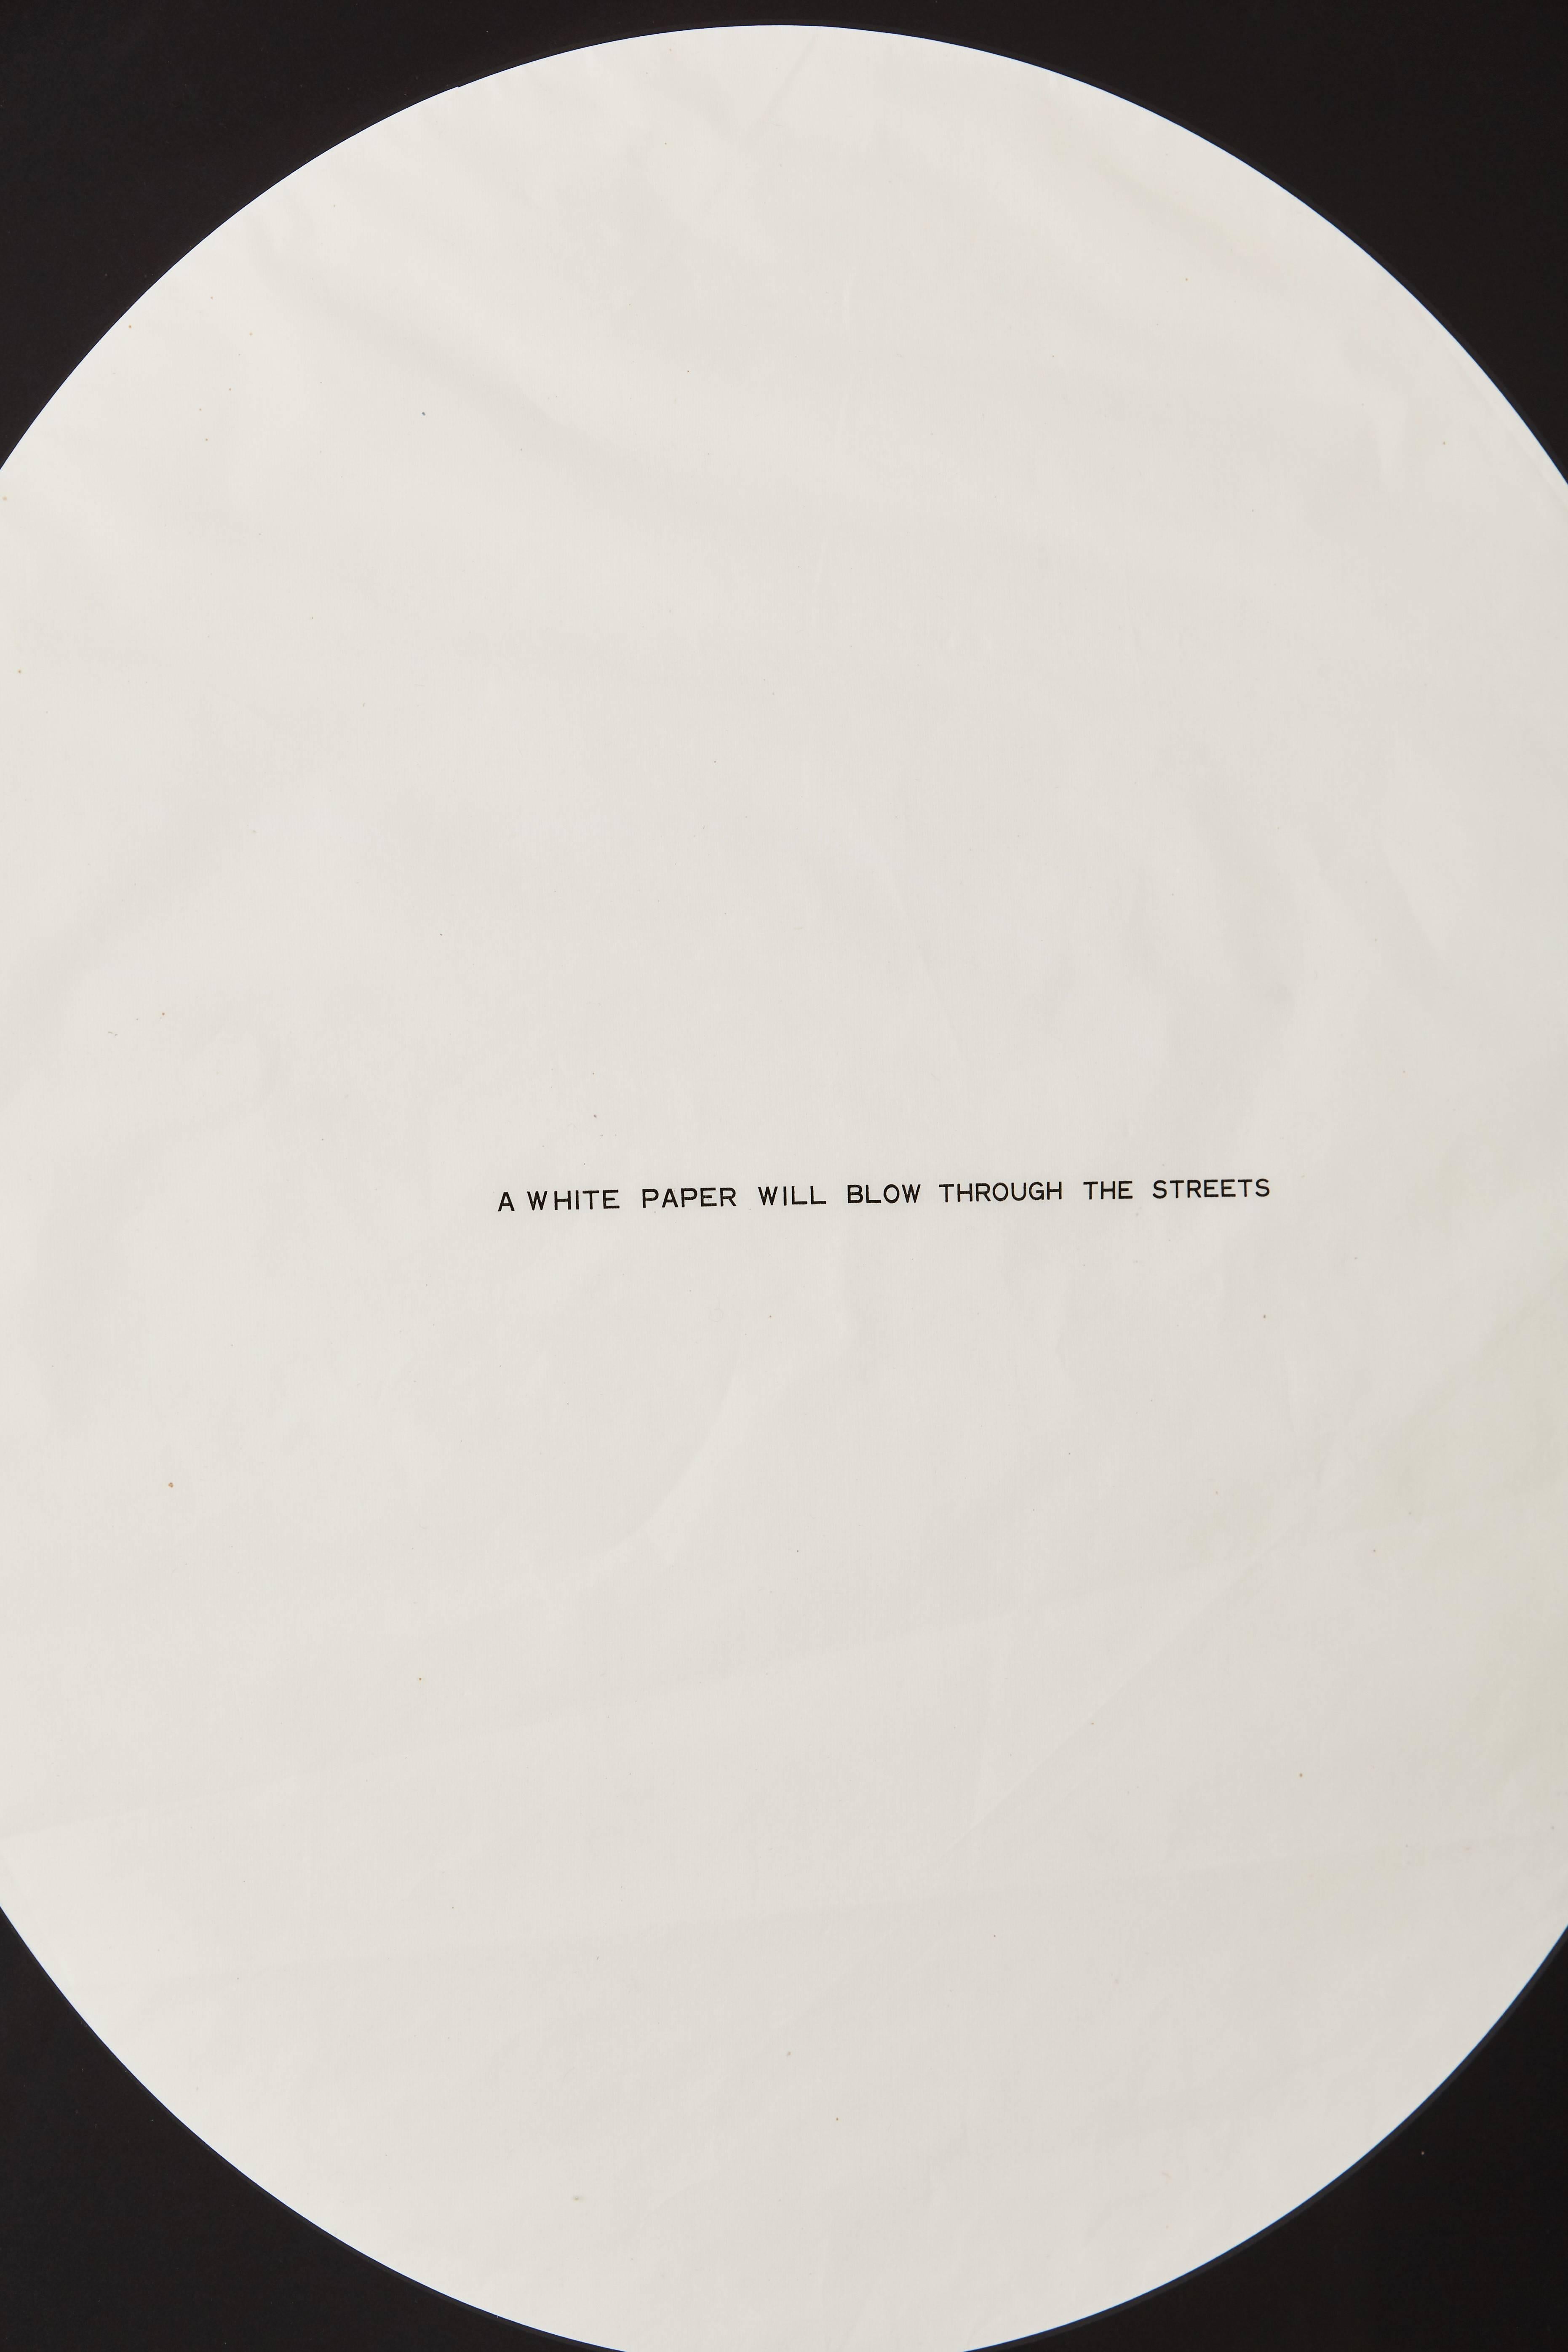 Framed Offset lithograph ephemera printed in black on white Japanese paper sheet. 

James Lee Byars printed the words “A White Paper Will Blow Through The Streets” onto a large disc of Japanese paper, one example of which is also said to have been